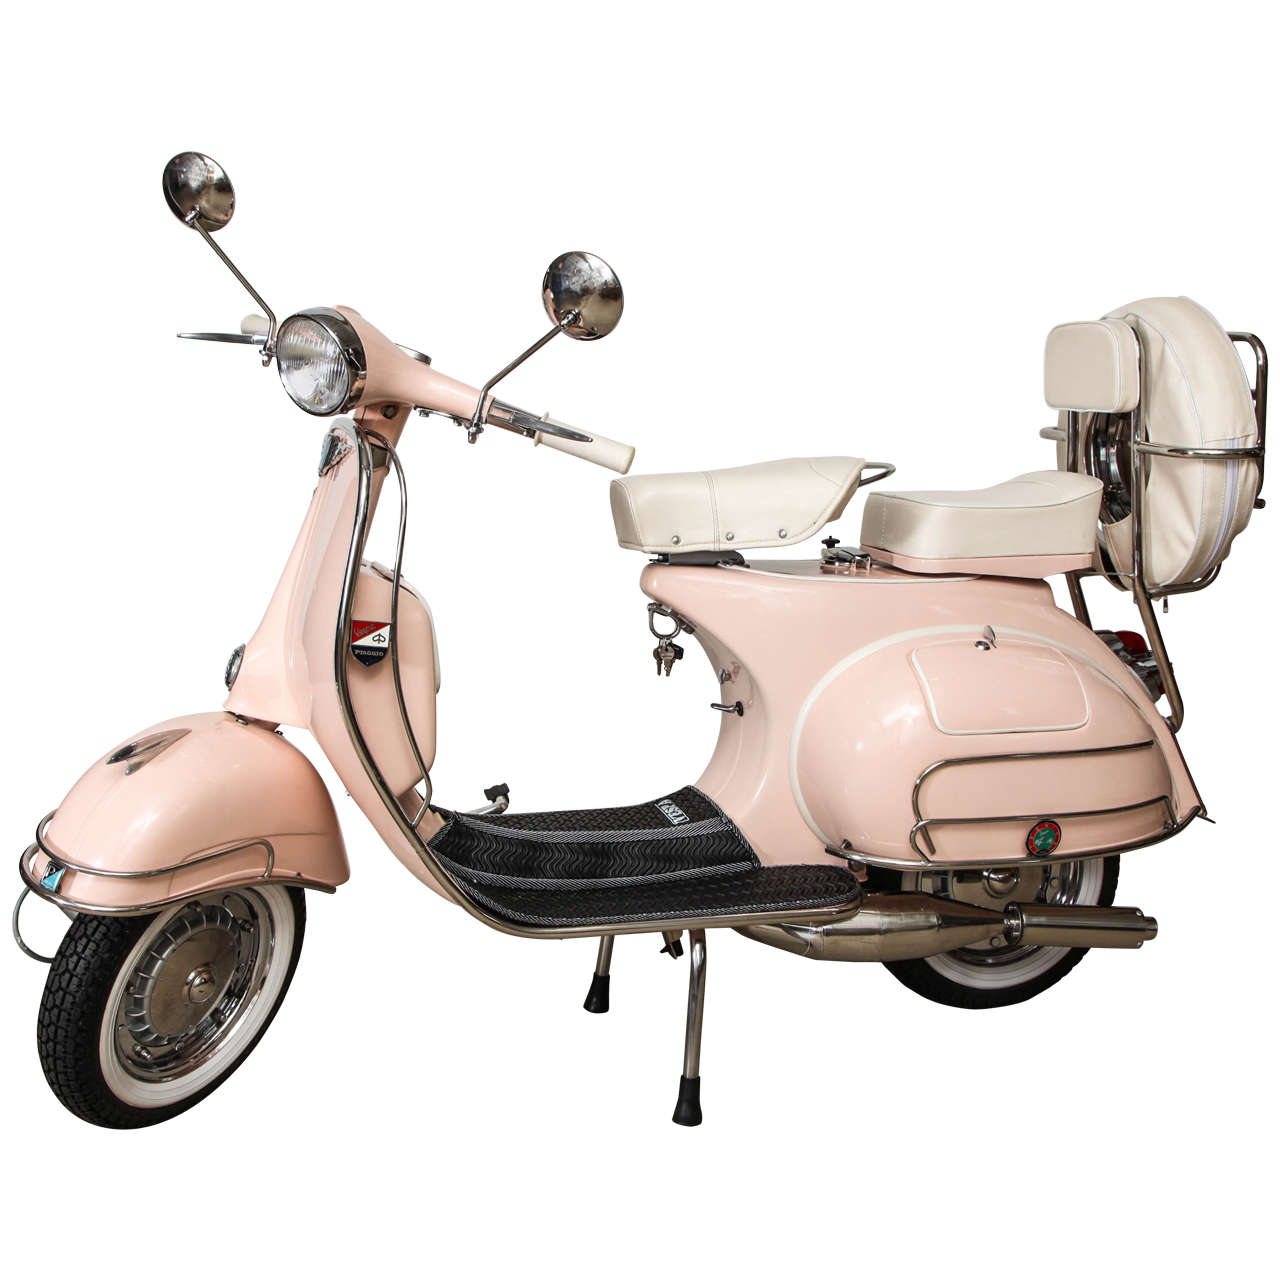 Fully Restored 1963 Pink with White Leather Vintage Italian, Piaggio Vespa